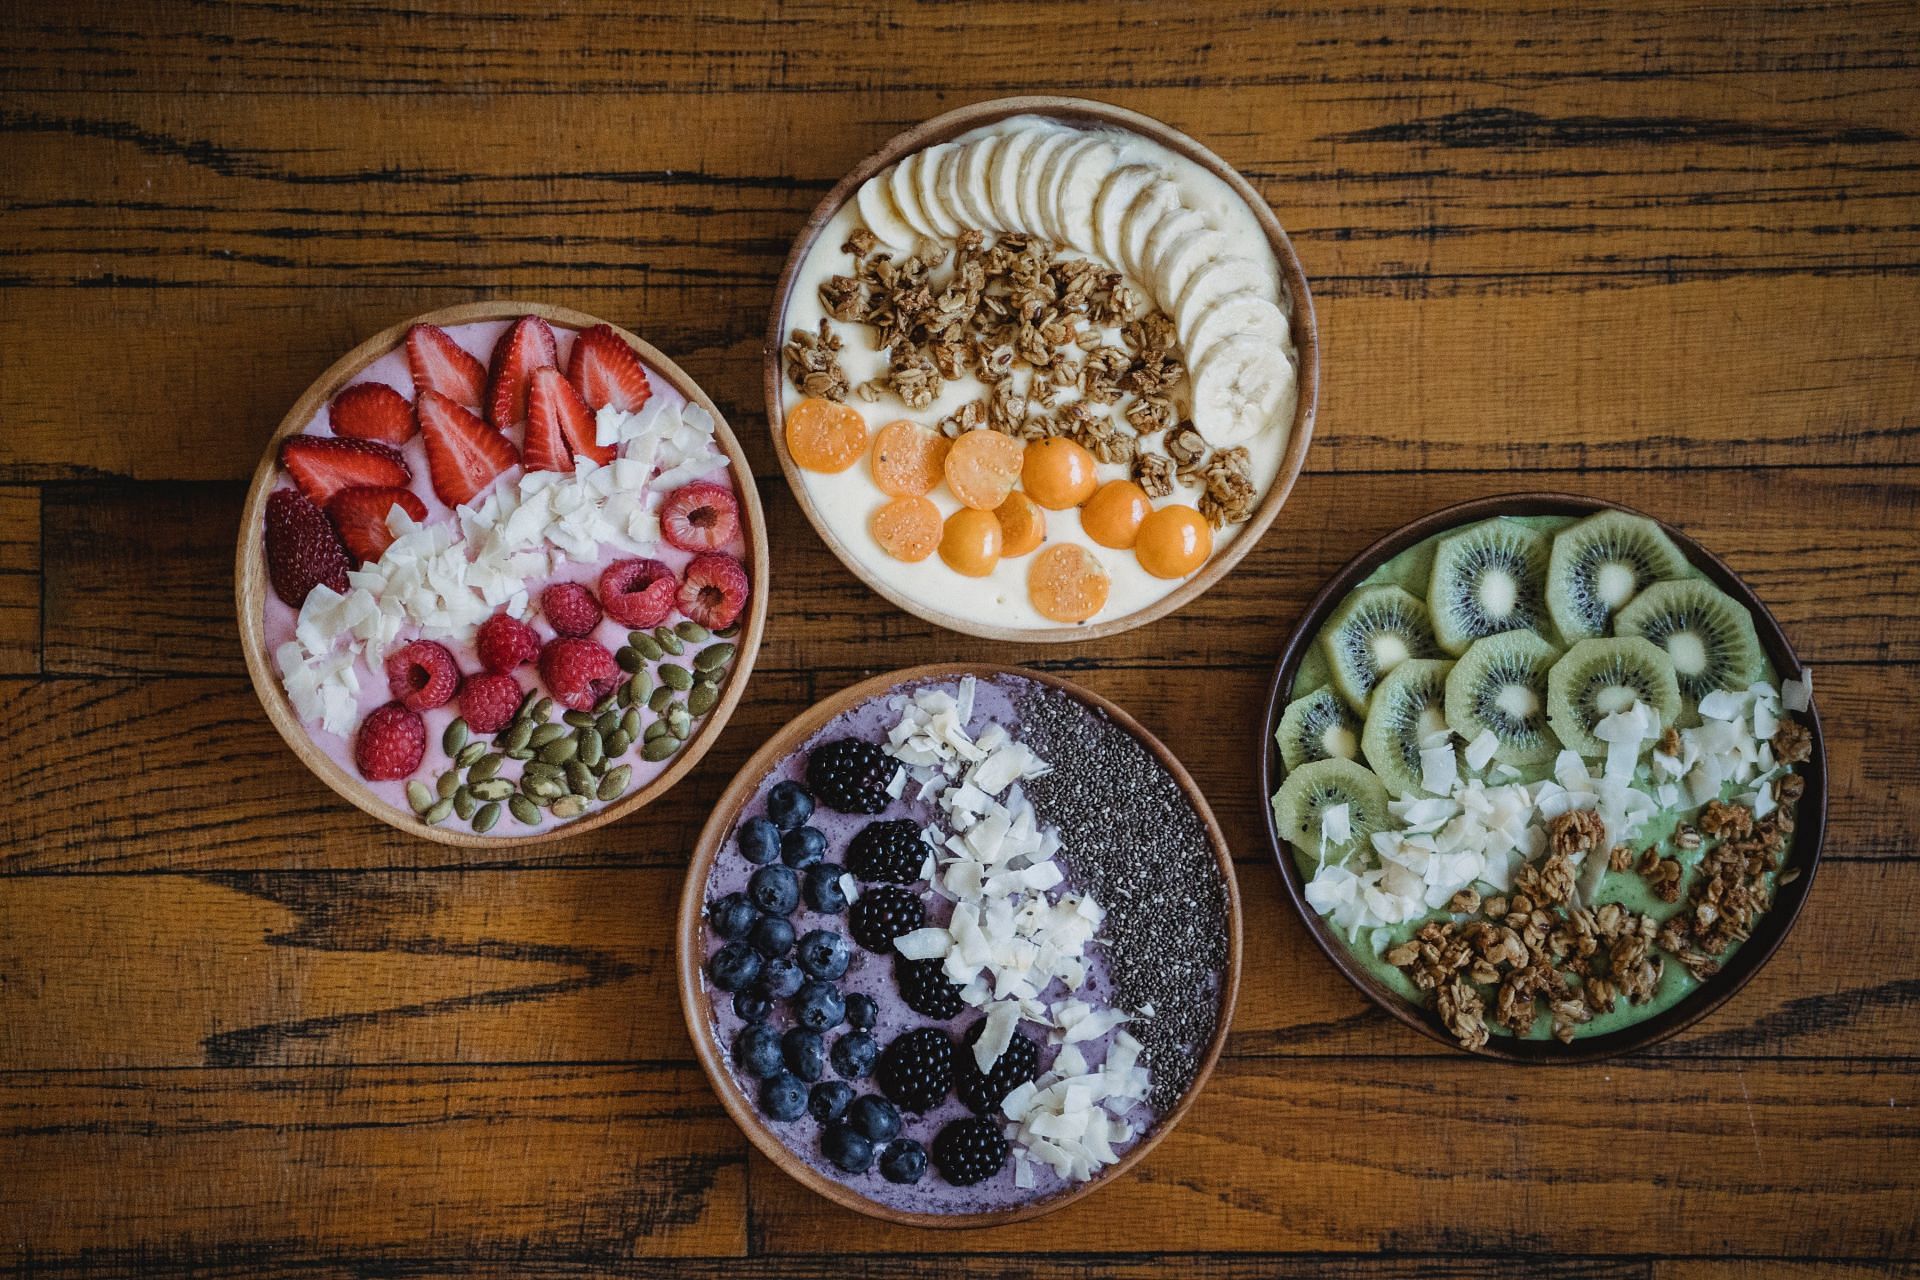 Foods to eat on an empty stomach (Image sourced via Pexels / Photo by barts)